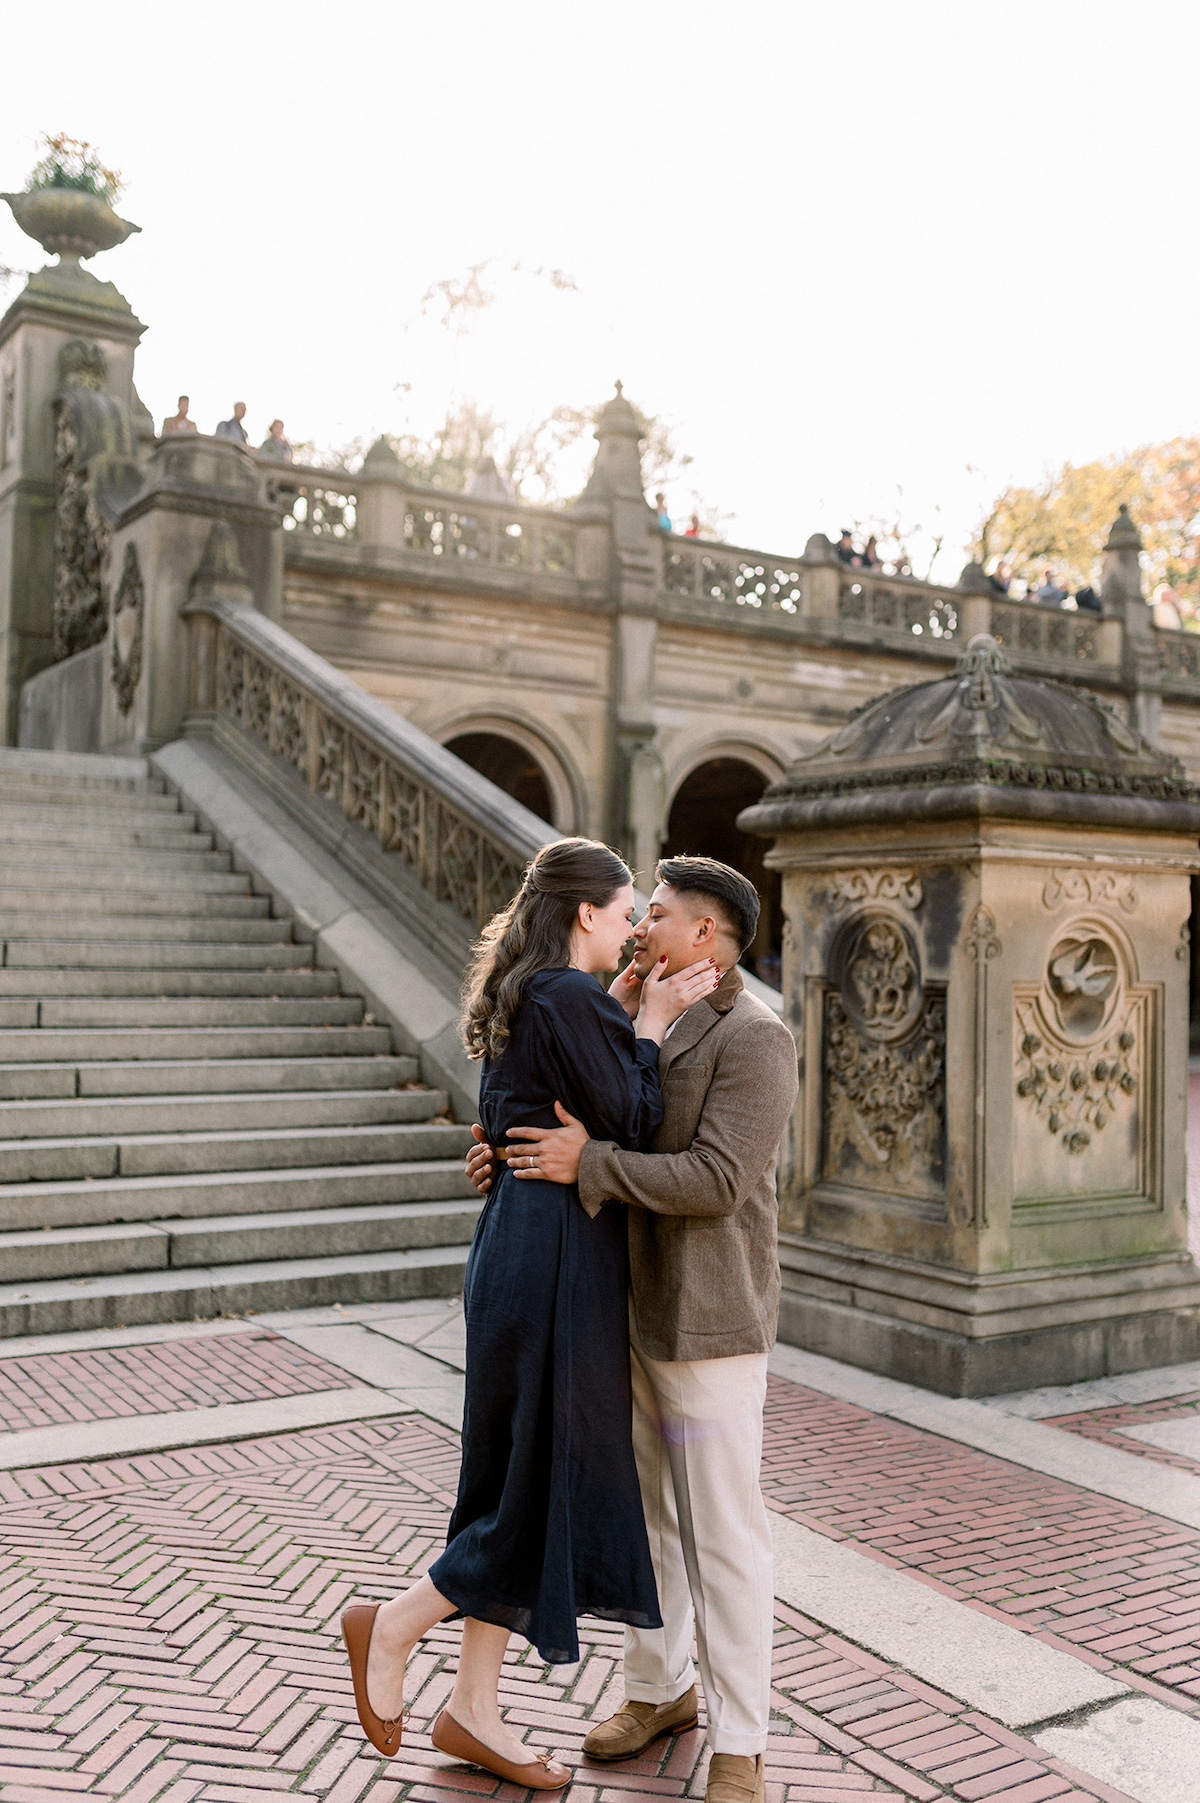 Symphony Estrada's rebrand comes to life as a luxury brand photographer captures the elegant ambiance of Central Park's Bethesda Terrace.